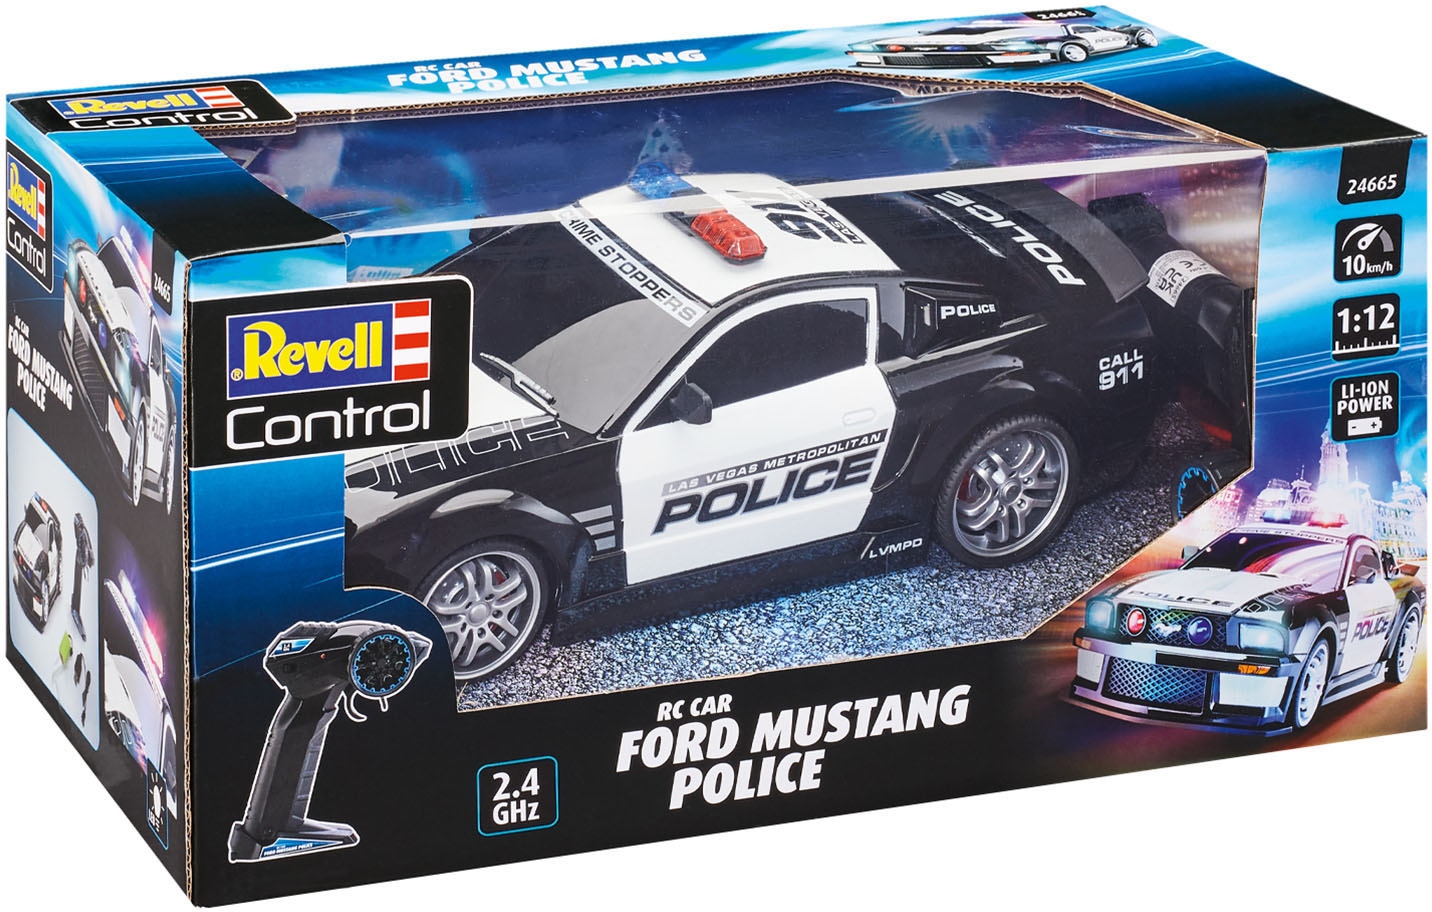 RC Car Ford Mustang Police Revell Control - RC Modelle & Zubehör